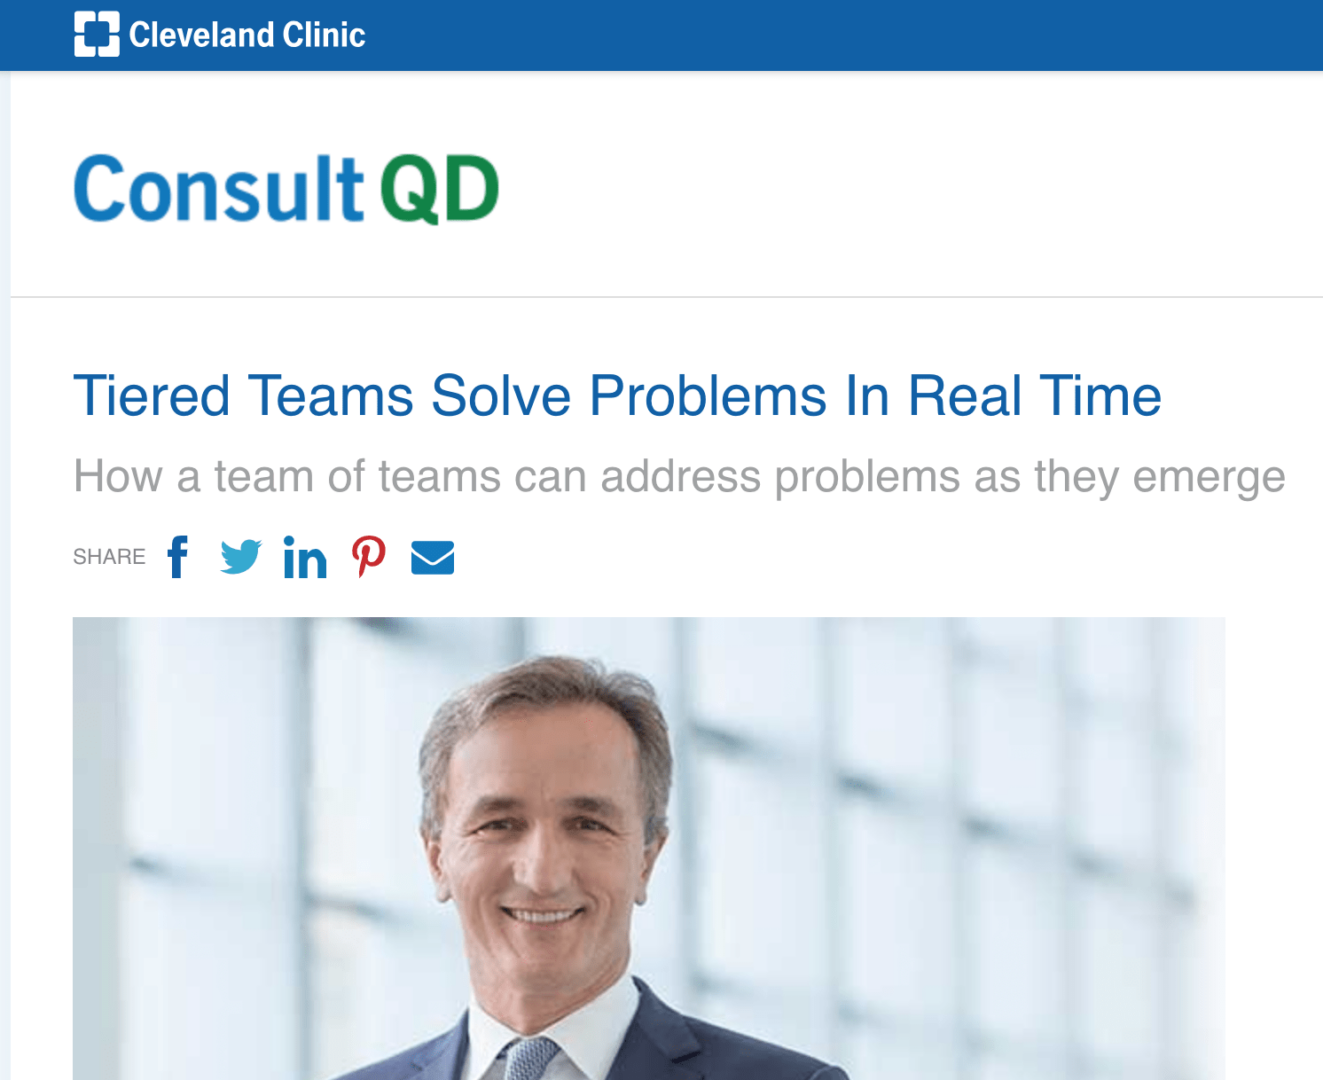 Tiered Teams Solve Problems In Real Time How a team of teams can address problems as they emerge